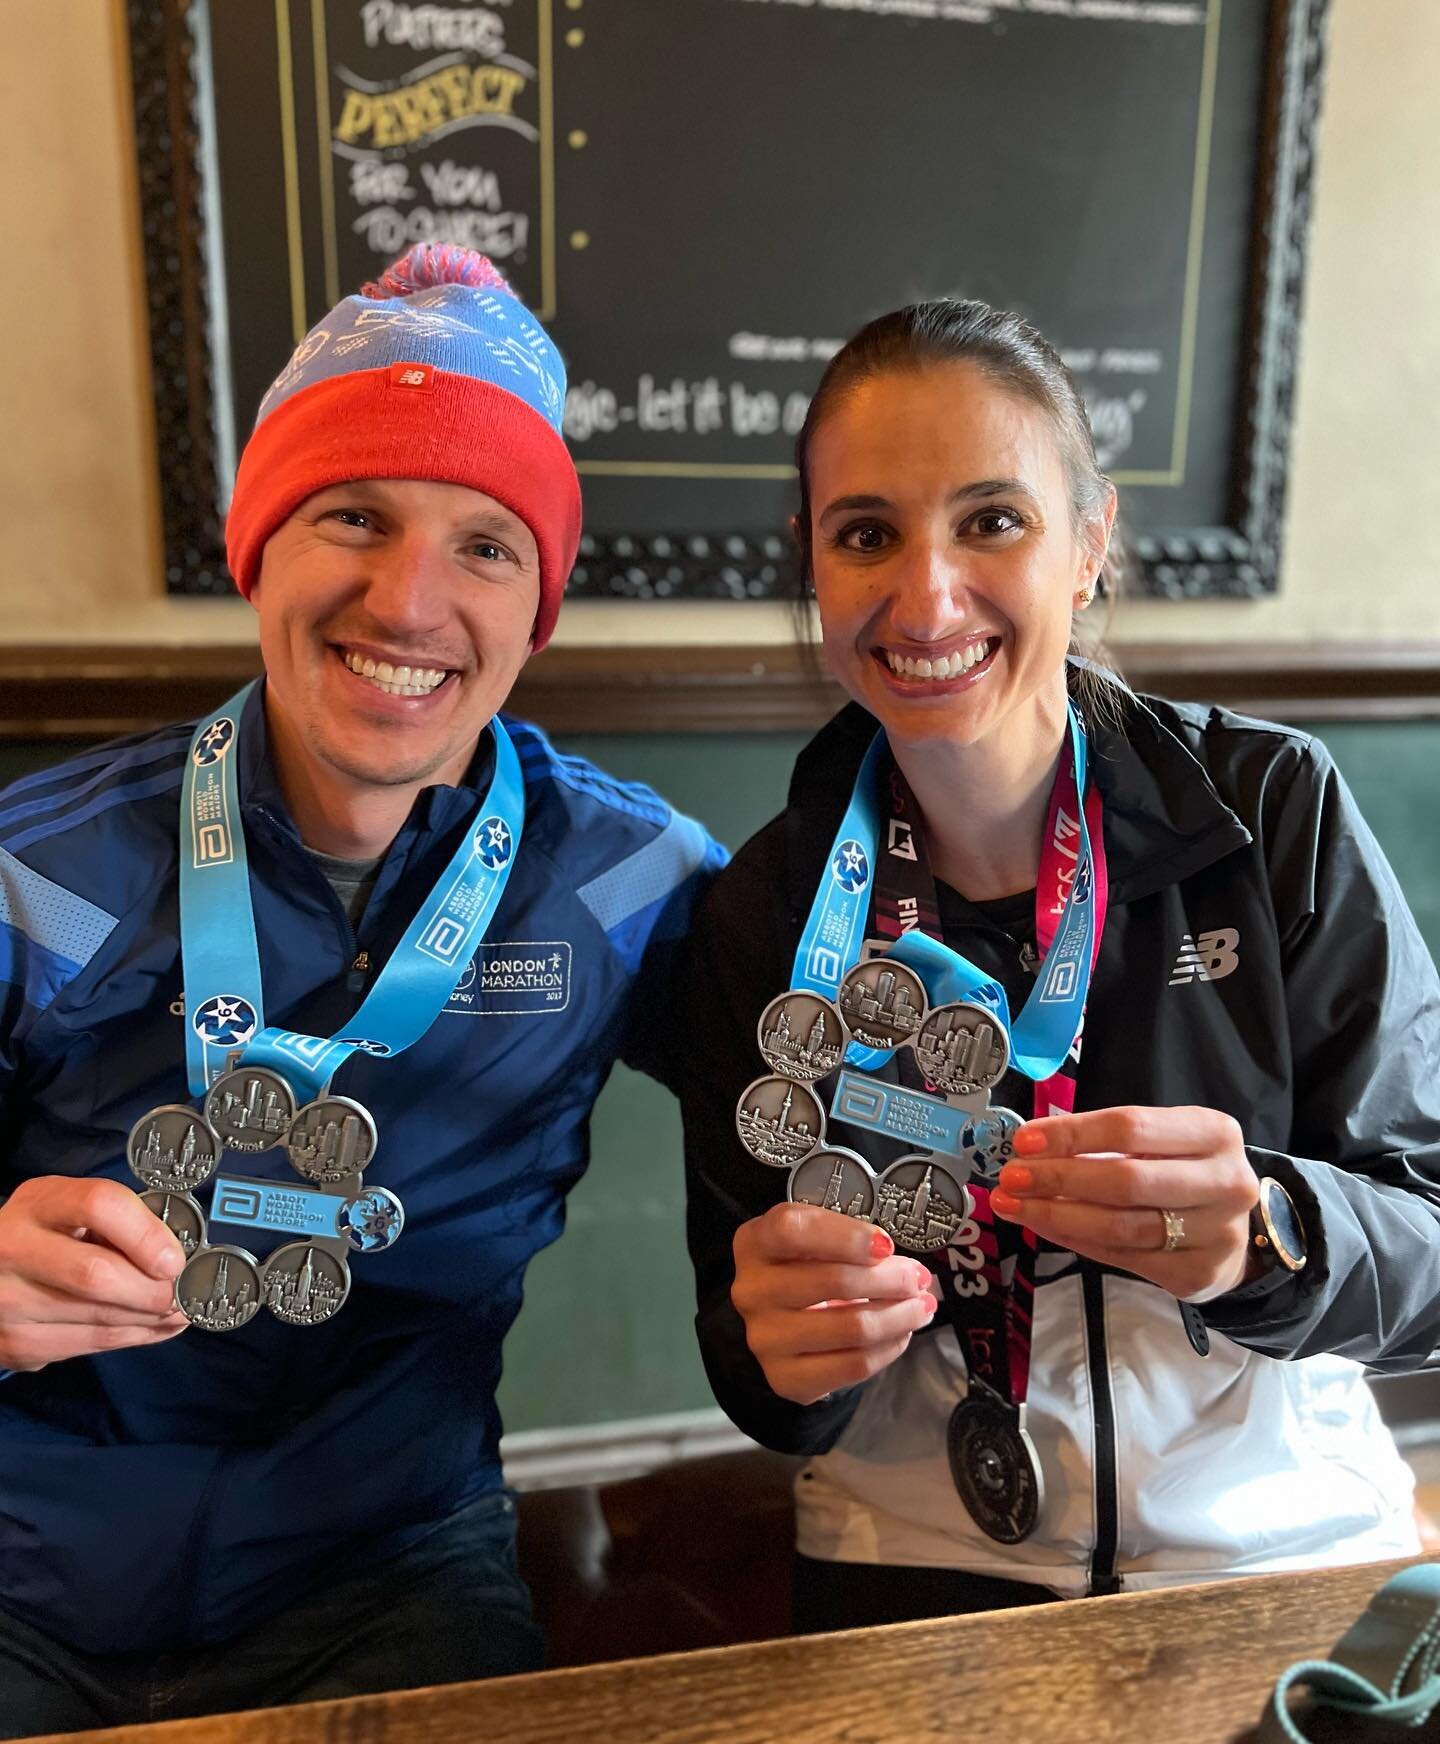 The Grand Slam of Marathon Running: completing the 6 World Marathon Majors. Only 11,000 people in the world have achieved this feat and we have now FOUR Hustlers who have claimed the prestigious Six Star medal! 🏃🏼&zwj;♀️🏃🏽🏅Congrats to Lisa and N